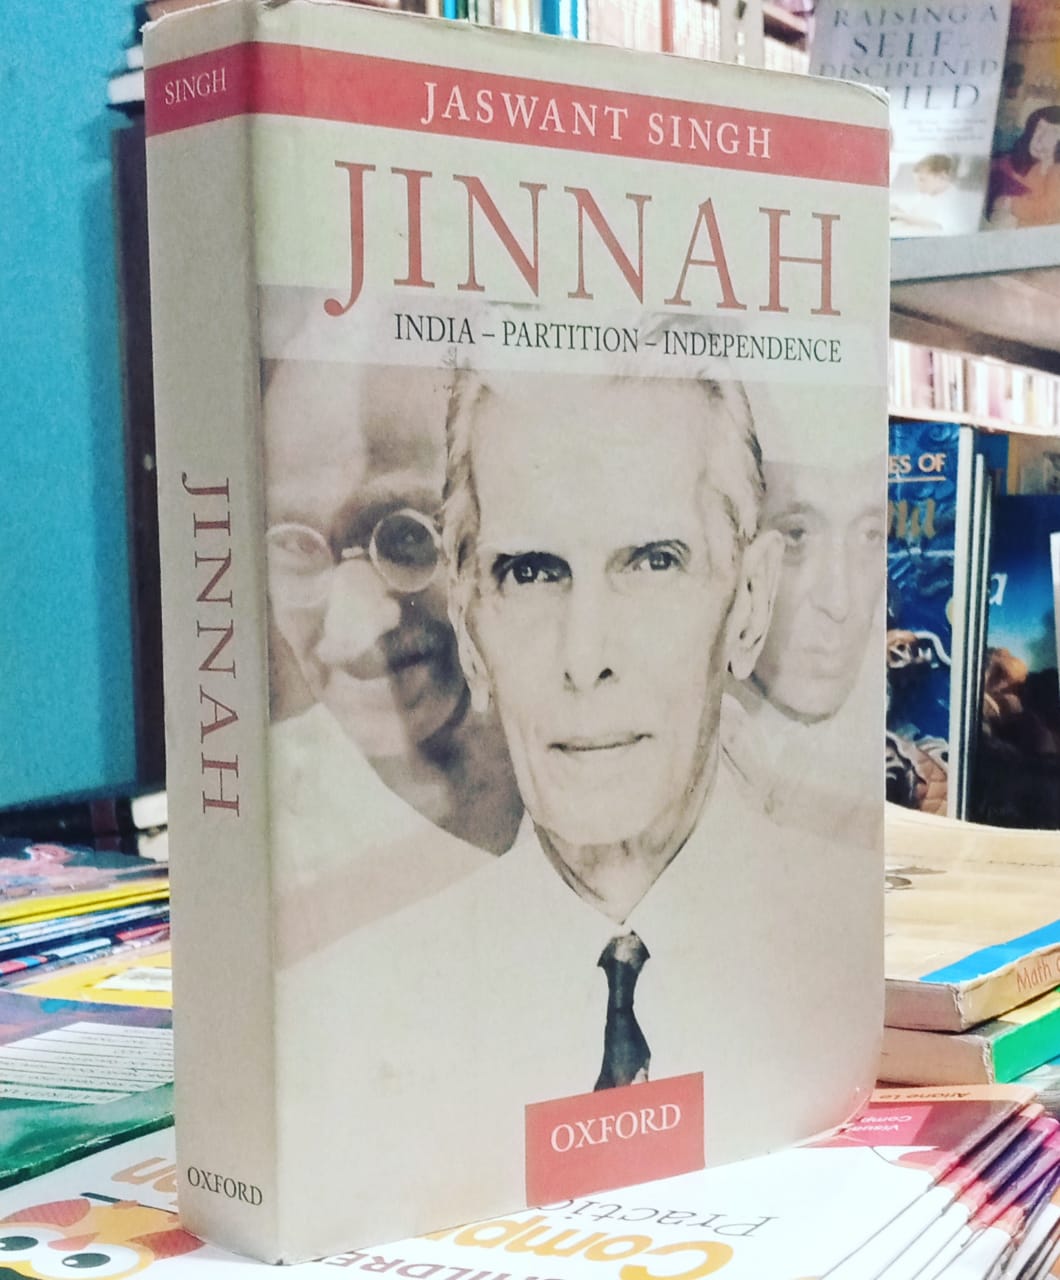 jinnah  india-partition-independence by jaswant singh. original hardcover